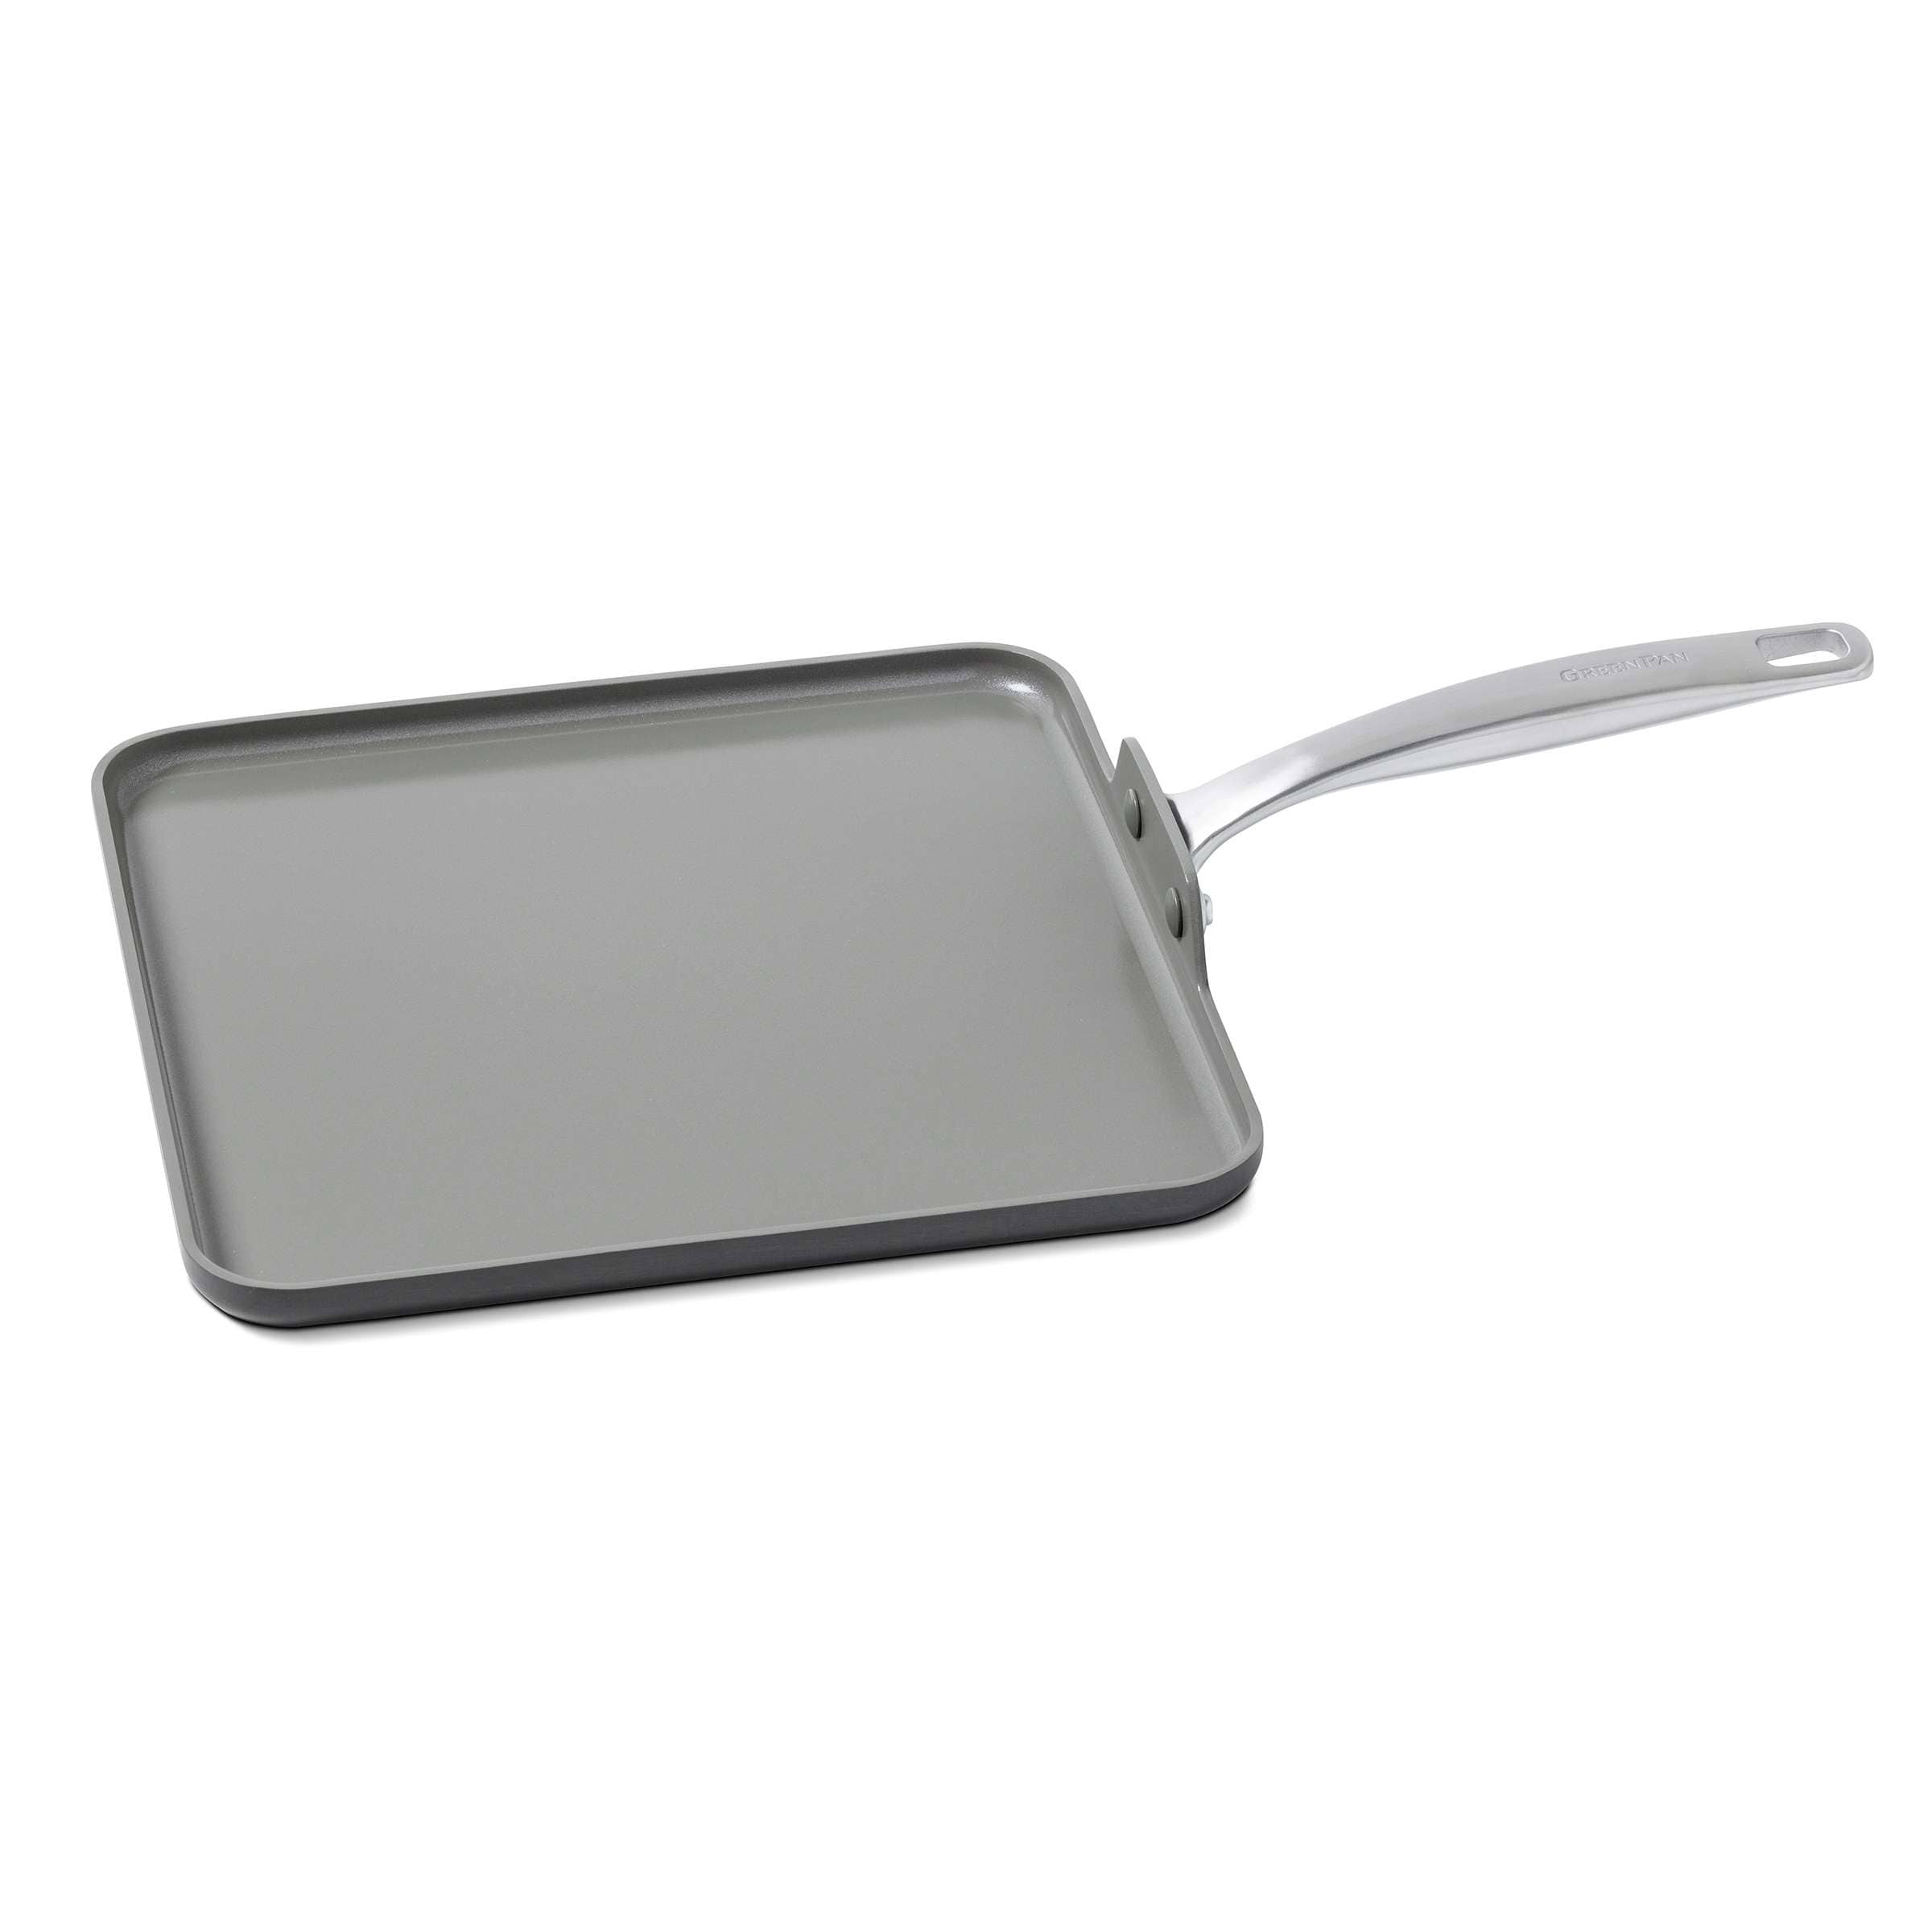 https://ak1.ostkcdn.com/images/products/is/images/direct/dae75dd8c6758a98b8ca313bd49ede46c18a9423/GreenPan-Chatham-Ceramic-Non-Stick-Square-Griddle%2C-11-Inch.jpg